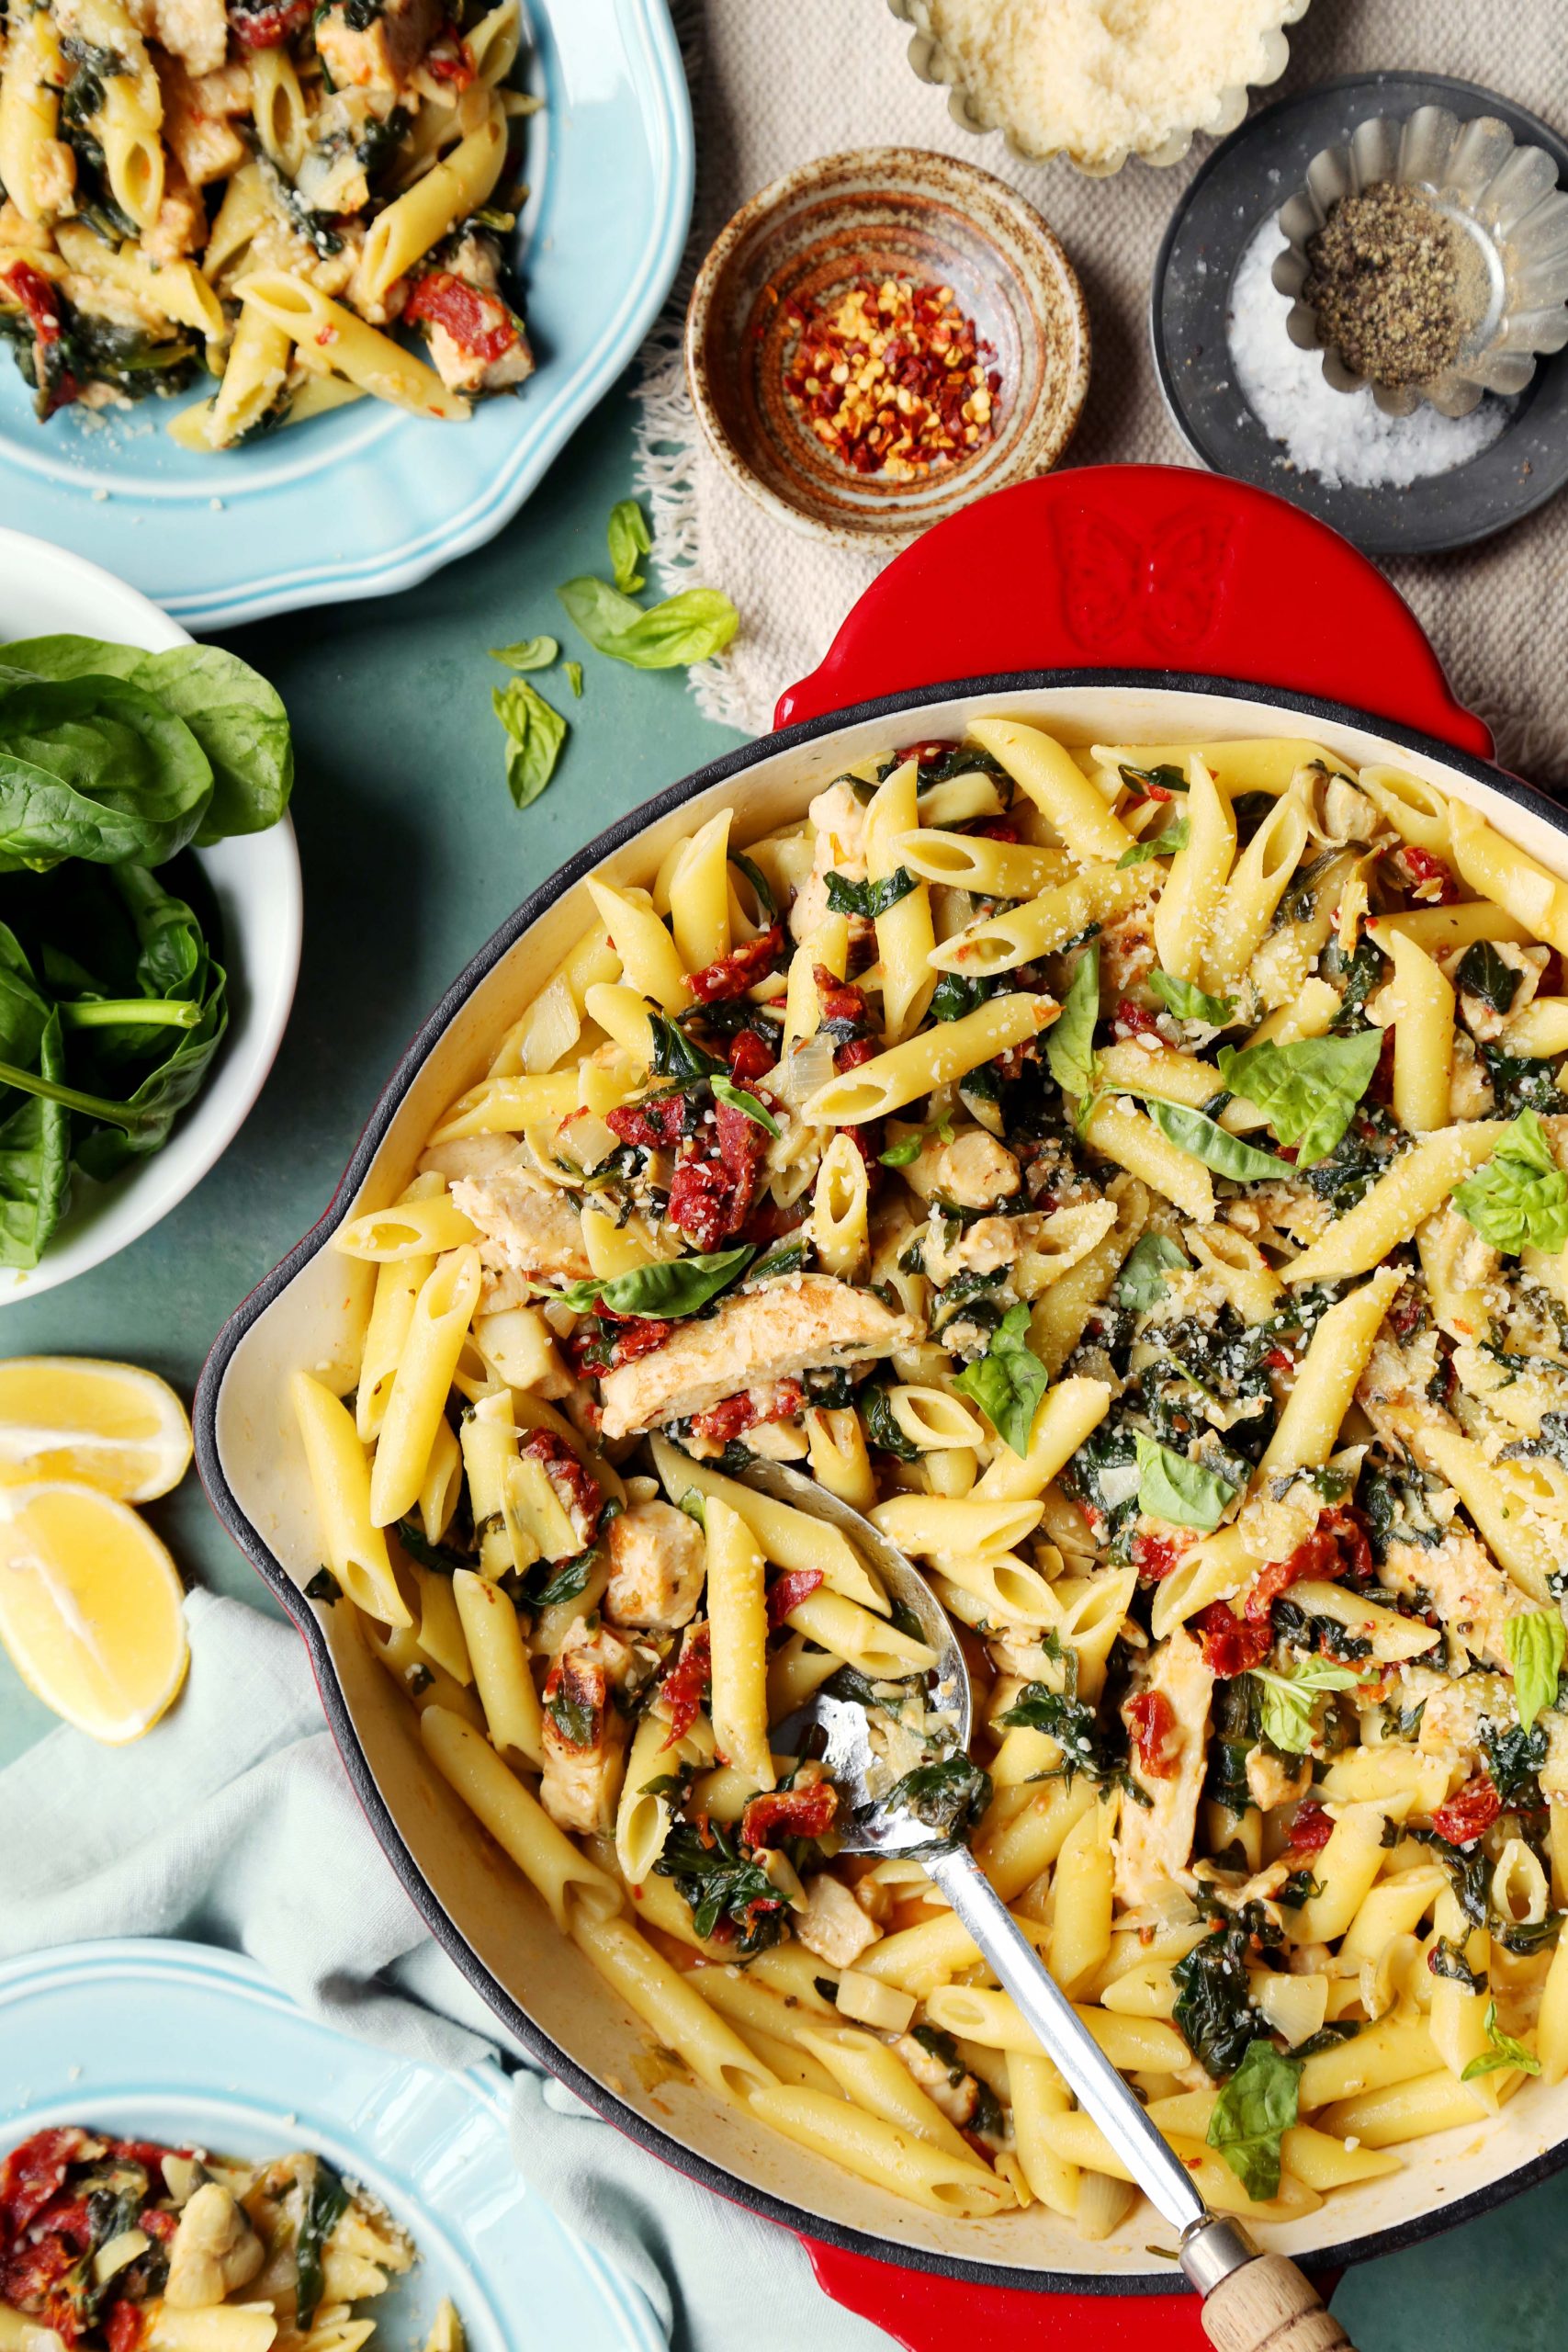 Spinach and Artichoke Pantry Pasta